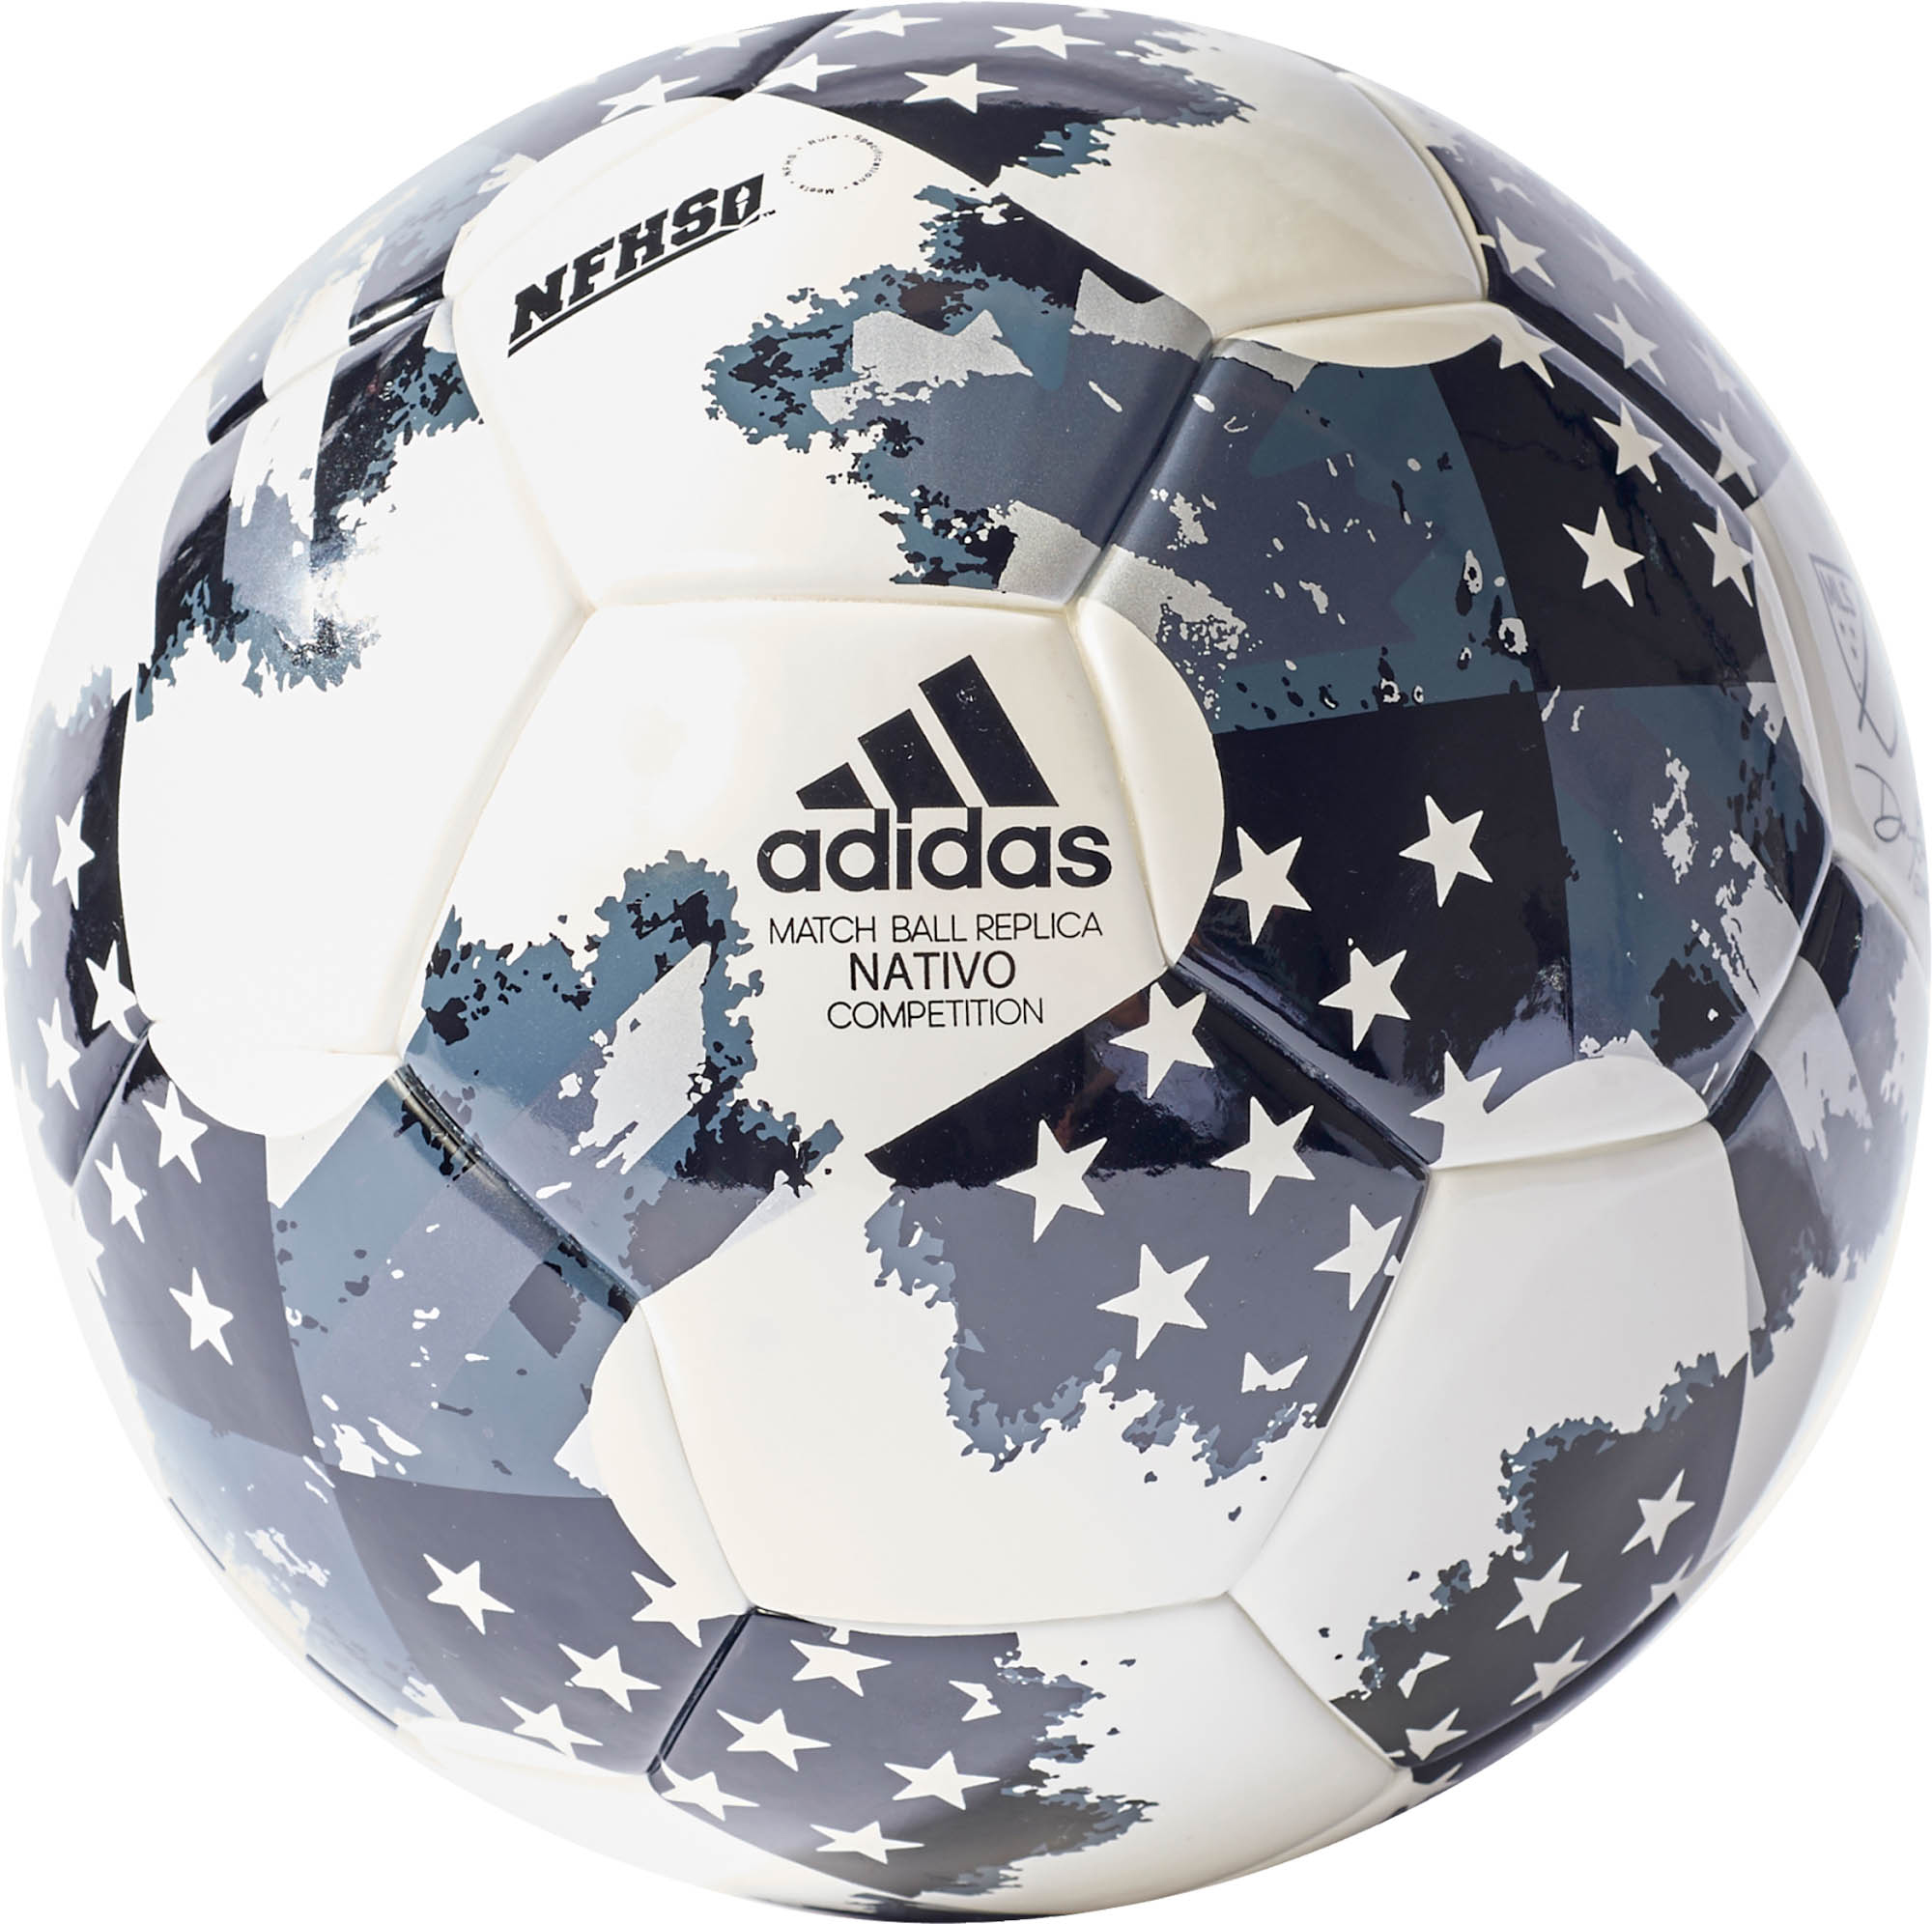 adidas mls competition nfhs soccer ball